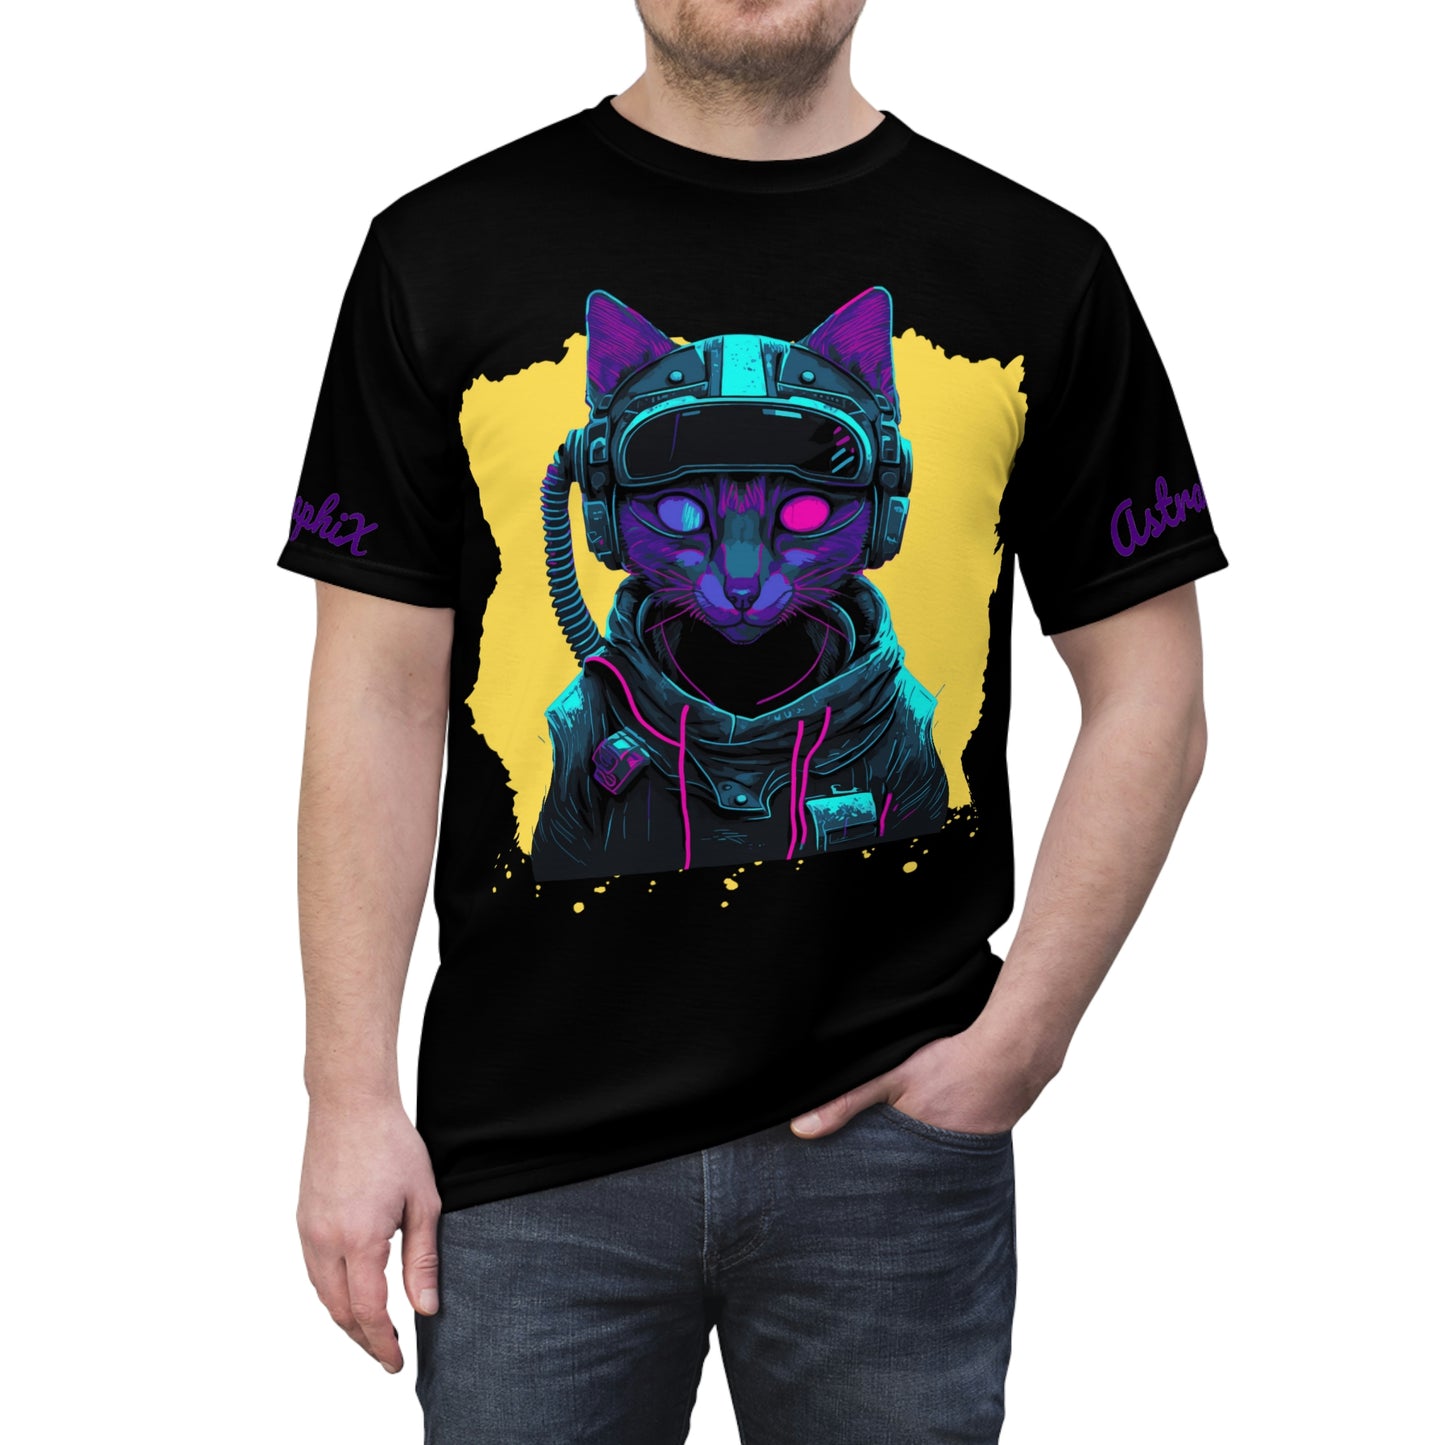 Cyber Punk Collection - Unisex AOP Cut & Sew Tee - Cyber Kitty v1 in Black